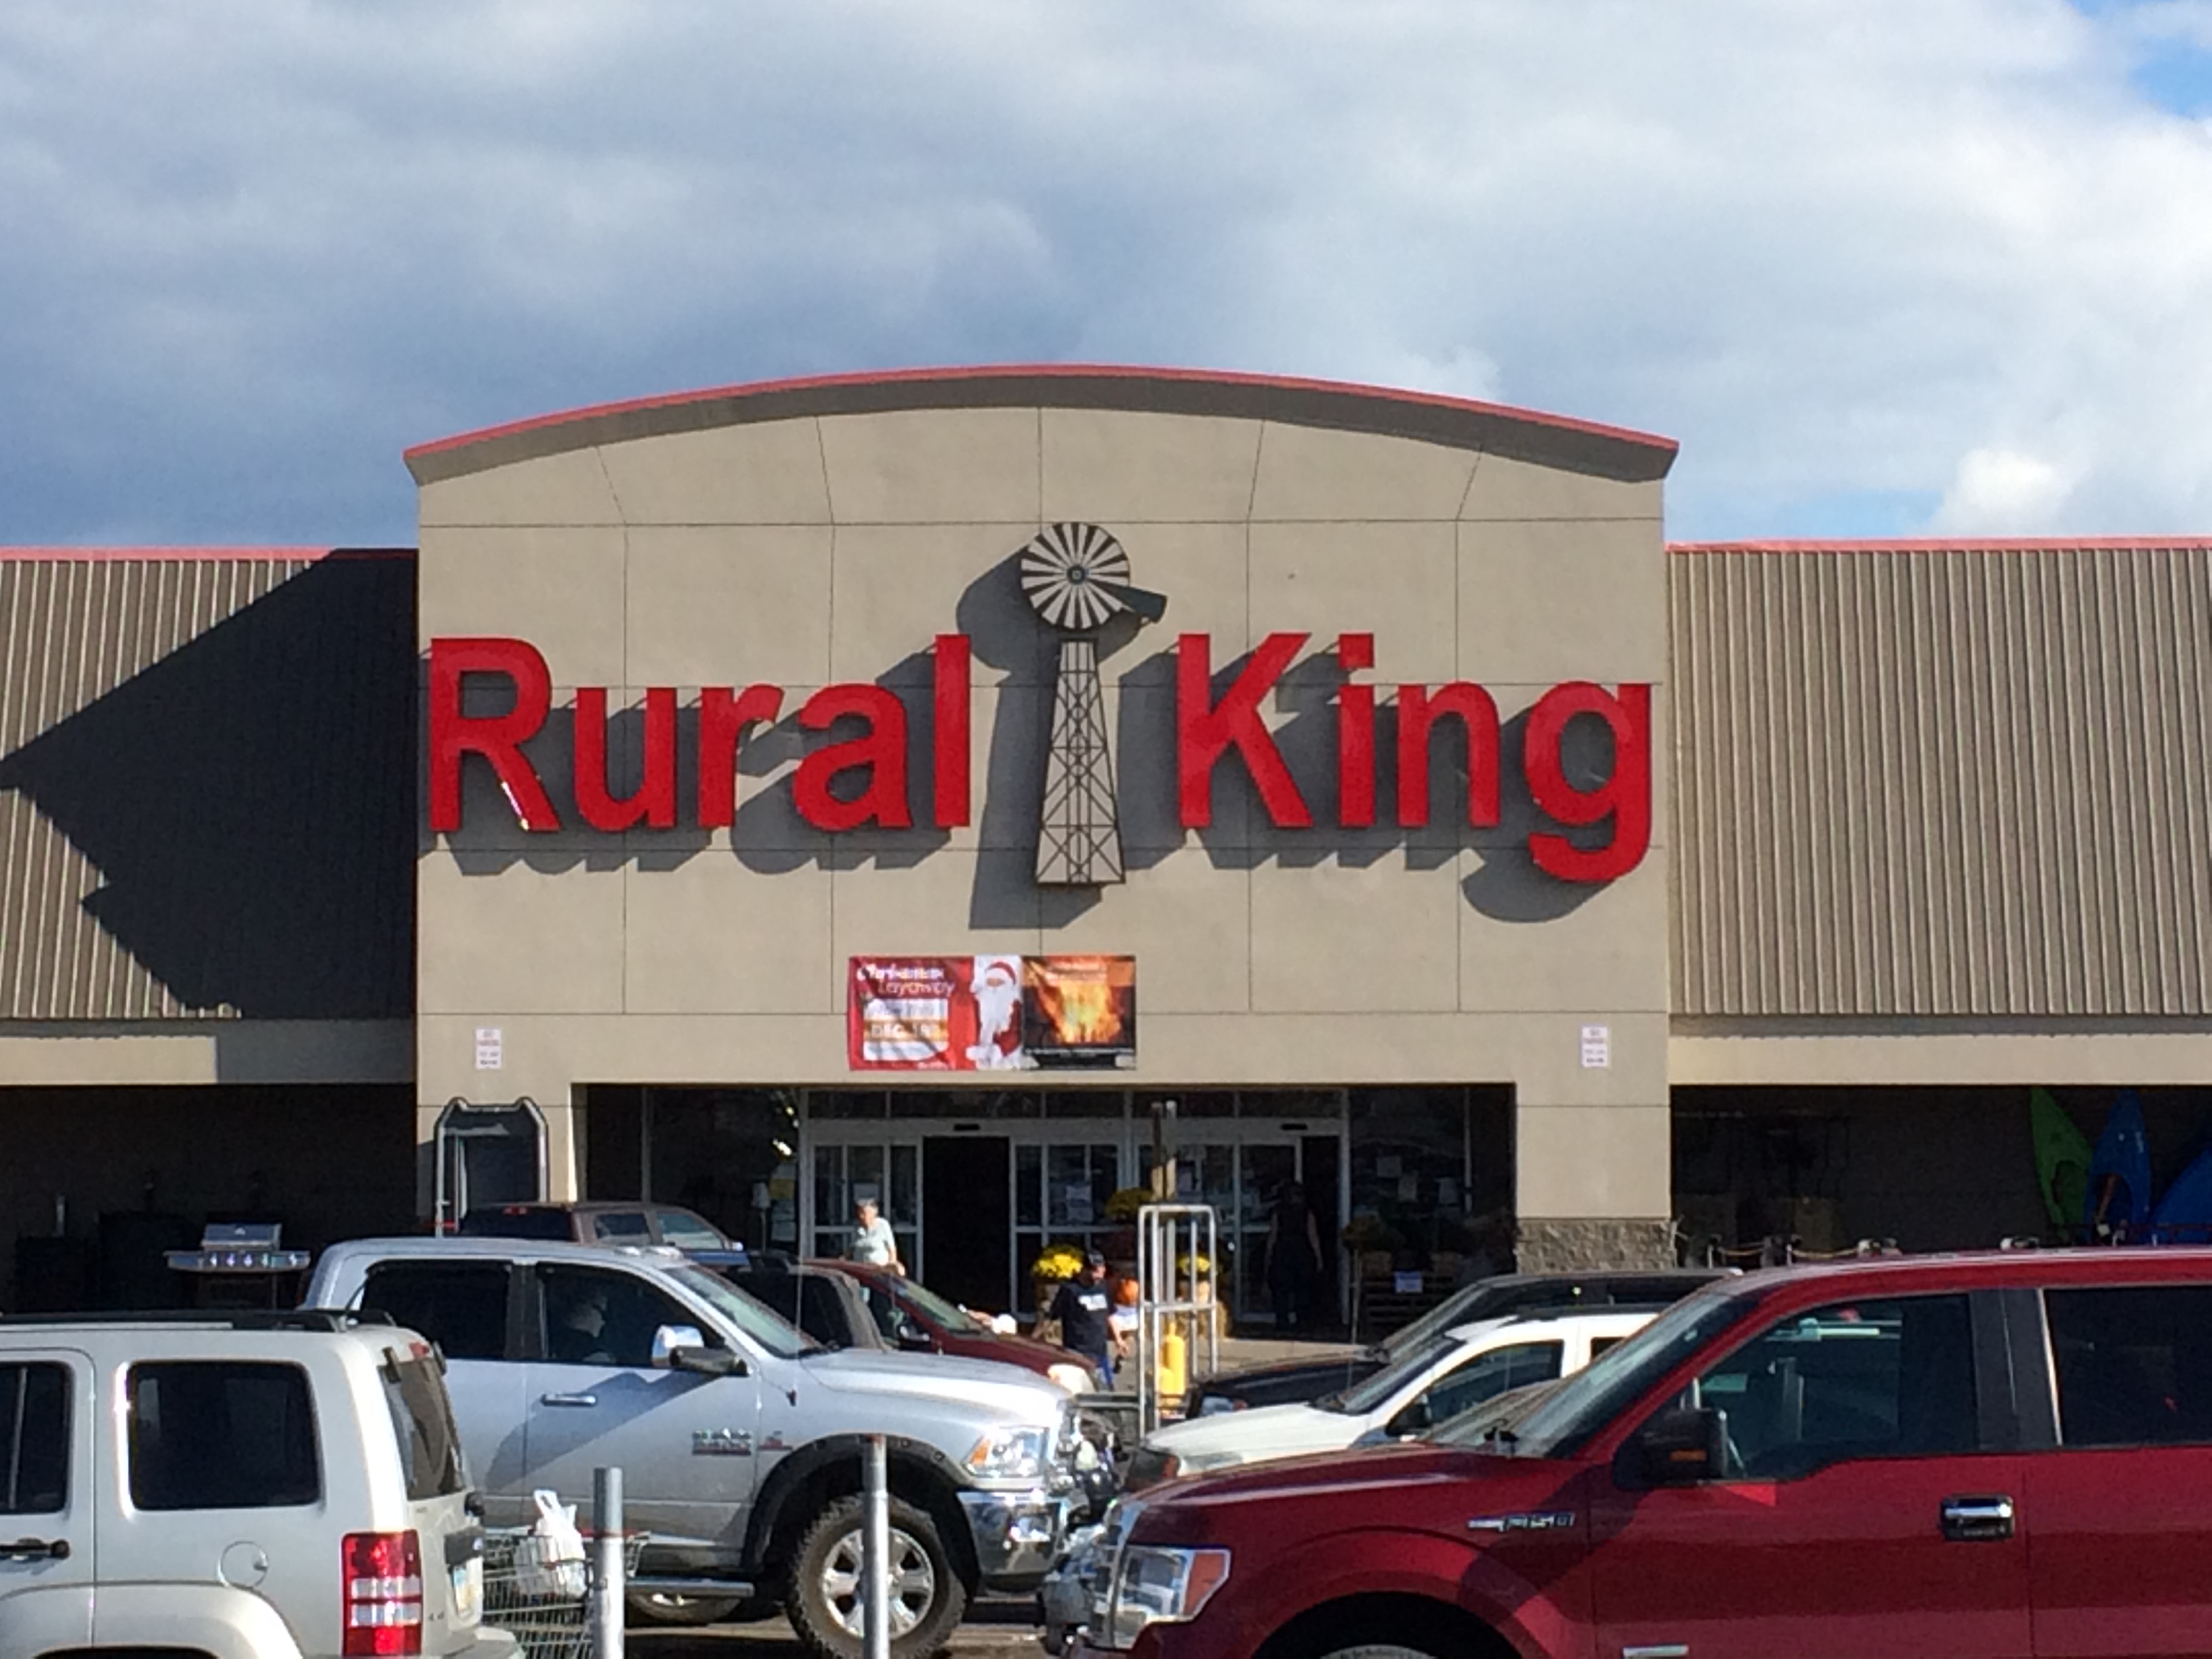 Rural king is headquartered in mattoon, united states. 